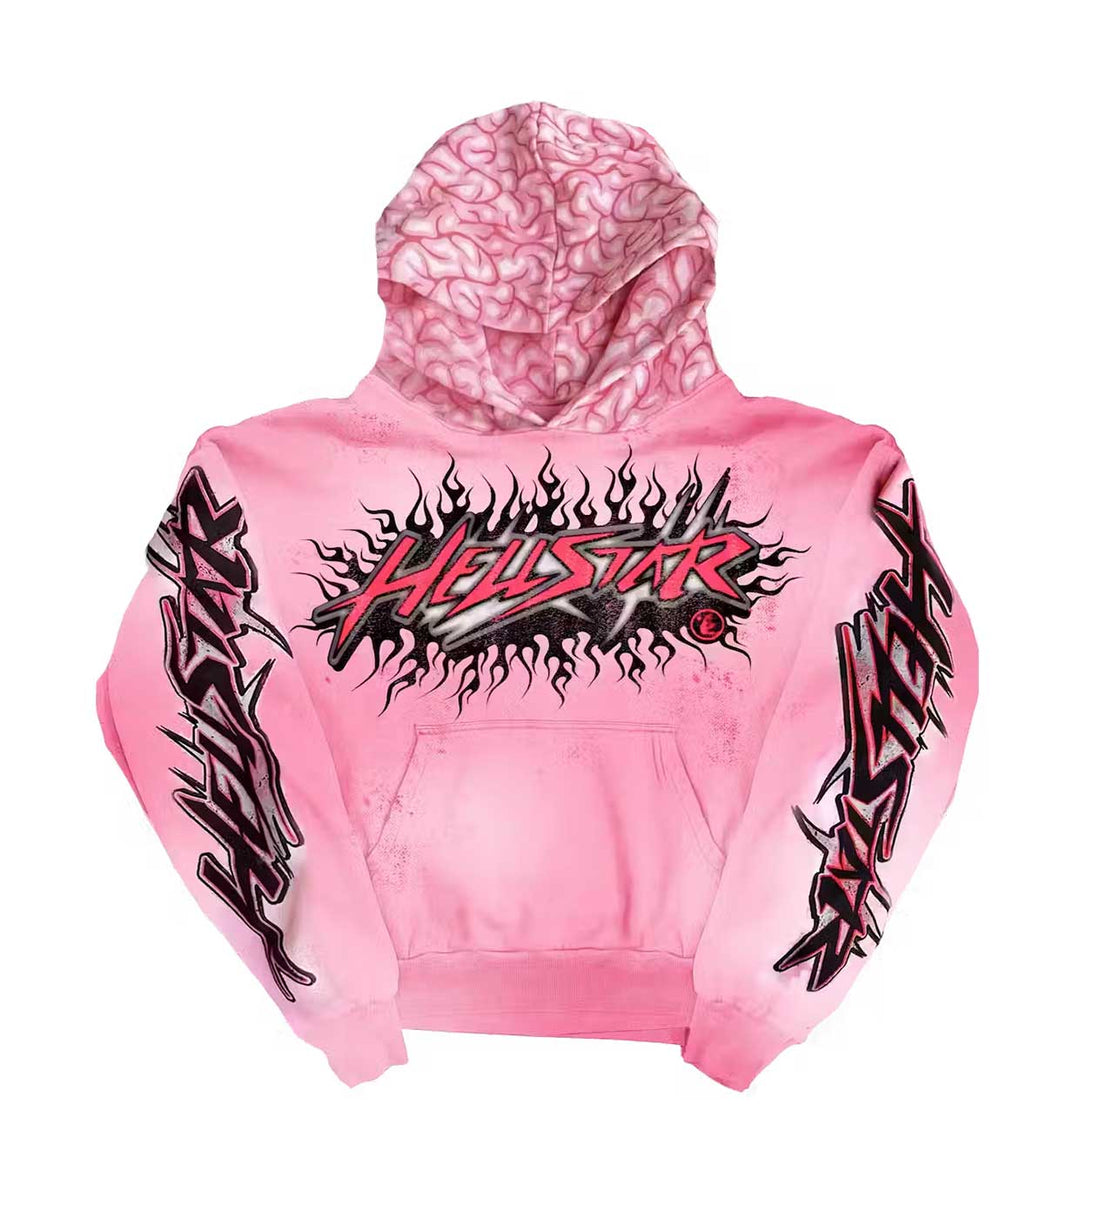 Product Image Of Hellstar Brainwashed Hoodie Pink Front View